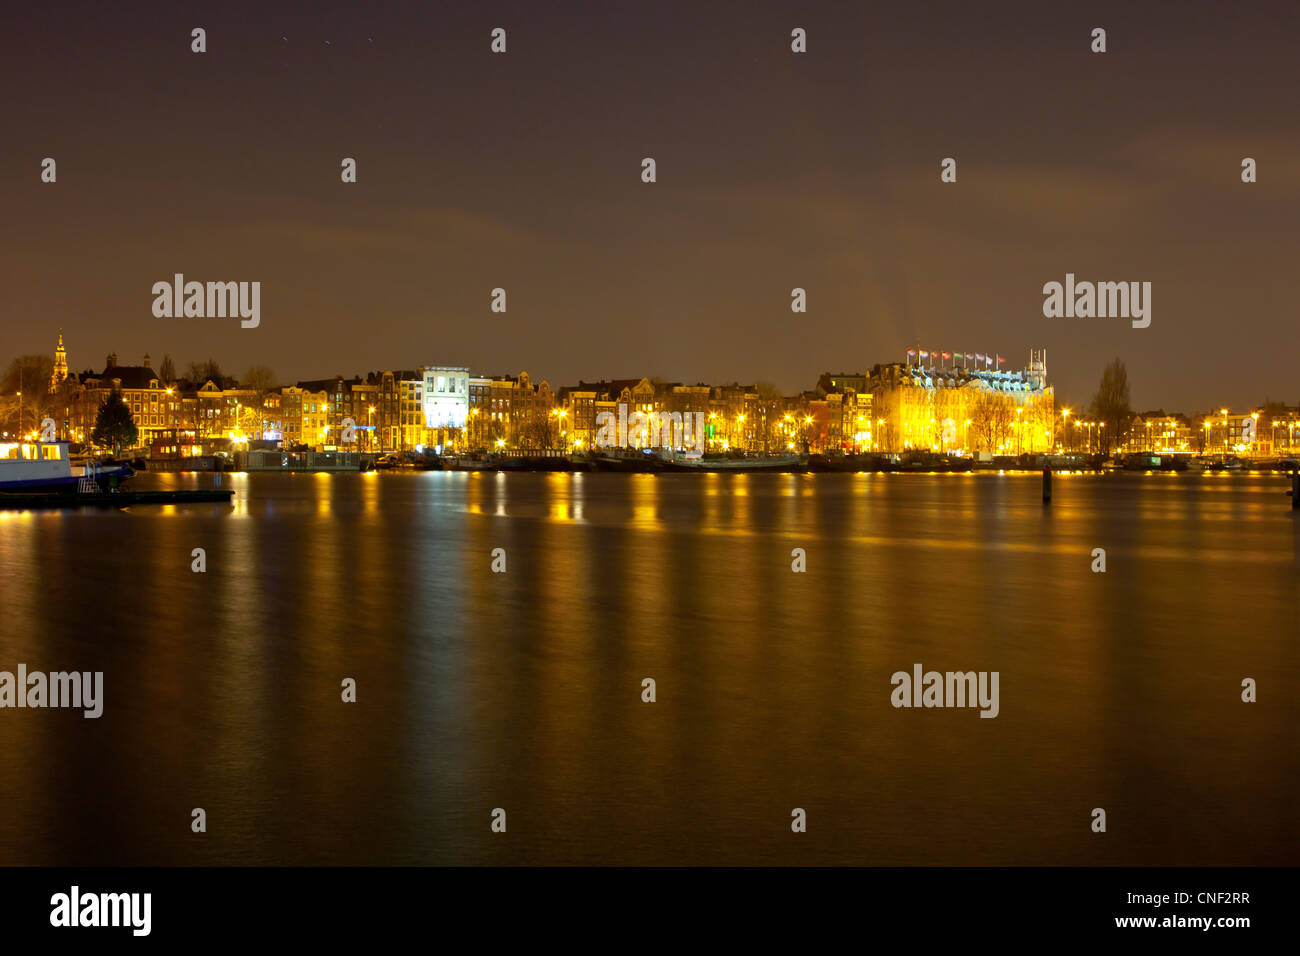 Amsterdam skyline at night with historic buildings and boats Stock Photo